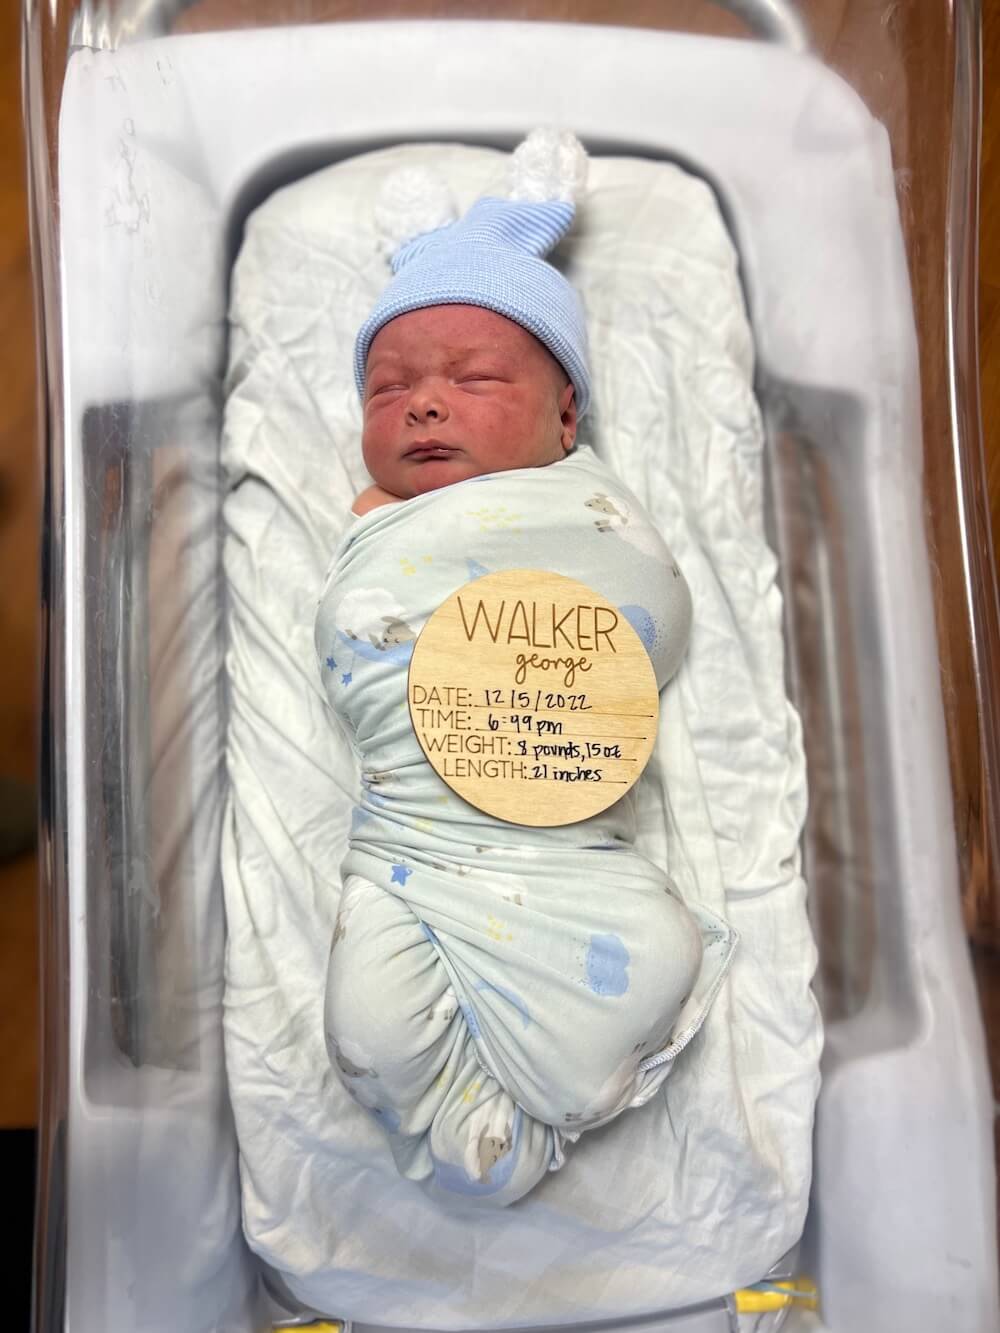 newborn baby swaddled in hospital bed with small round wooden sign that says Walker George